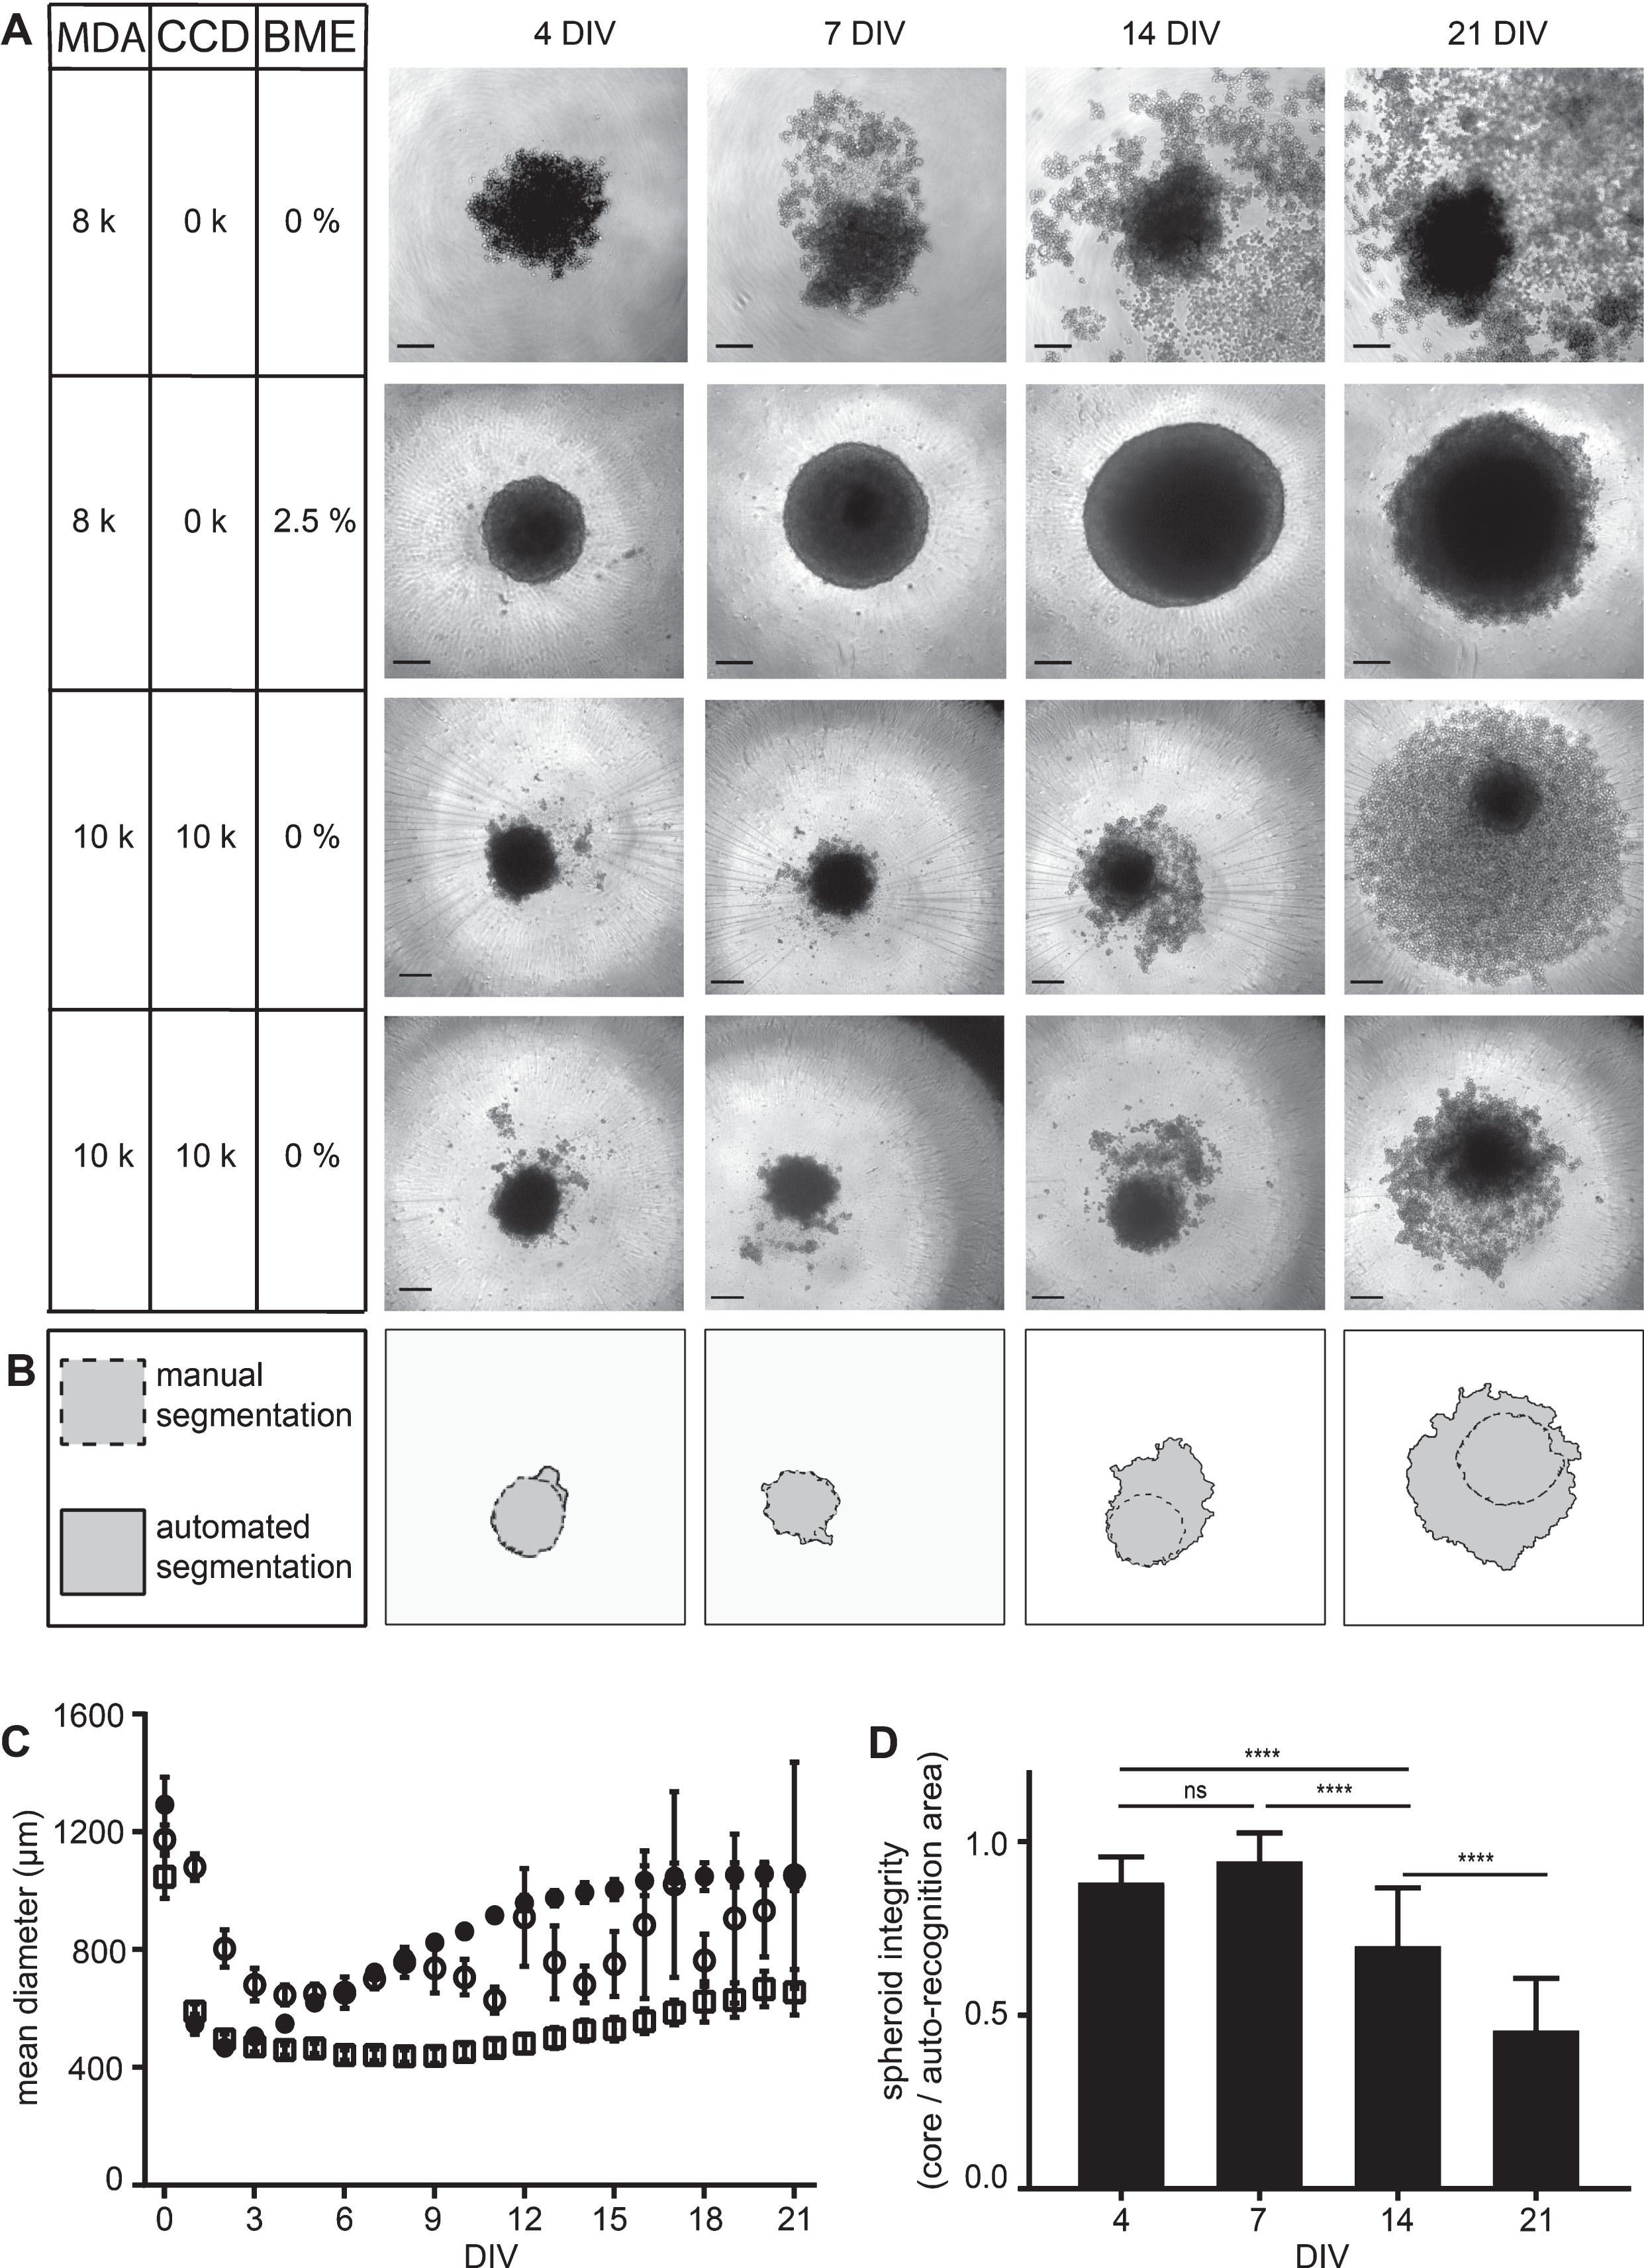 MDA-MB-231 spheroid integrity is preserved in the presence of BME and partially also achieved by co-culturing with CCD-1137Sk fibroblasts. MDA-MB-231 breast cancer cells were either cultured alone in ultra-low attachment plates for up to 21 DIV using MDA-M in the absence or presence of BME or in co-culture with CCD-1137Sk human fibroblasts in the absence of BME. (A) Brightfield micrographs of spheroids at 4, 7, 14, and 21 DIV under culture conditions as indicated with cell lines MDA-MB-231 (MDA) and CCD-1137Sk (CCD) supplemented with basal membrane extract (BME). For co-cultures, two data sets are shown to illustrate the variability in spheroid disintegration. Scale bars, 200 μm. (B) Difference between automated (solid outline) and manual segmentation (dashed outline) using SpheroidSizer as illustrated on the lower panels in (A). (C) Quantiative analysis of spheroid diameters as a function of DIV. Depicted are mean values±SD. For each data point, at least 12 spheroids were analysed. (D) Quotient of manually versus automatically segmented spheroid areas as a measure of spheroid integrity. Depicted are mean values±SD. For each data point, at least 40 spheroids were analysed.